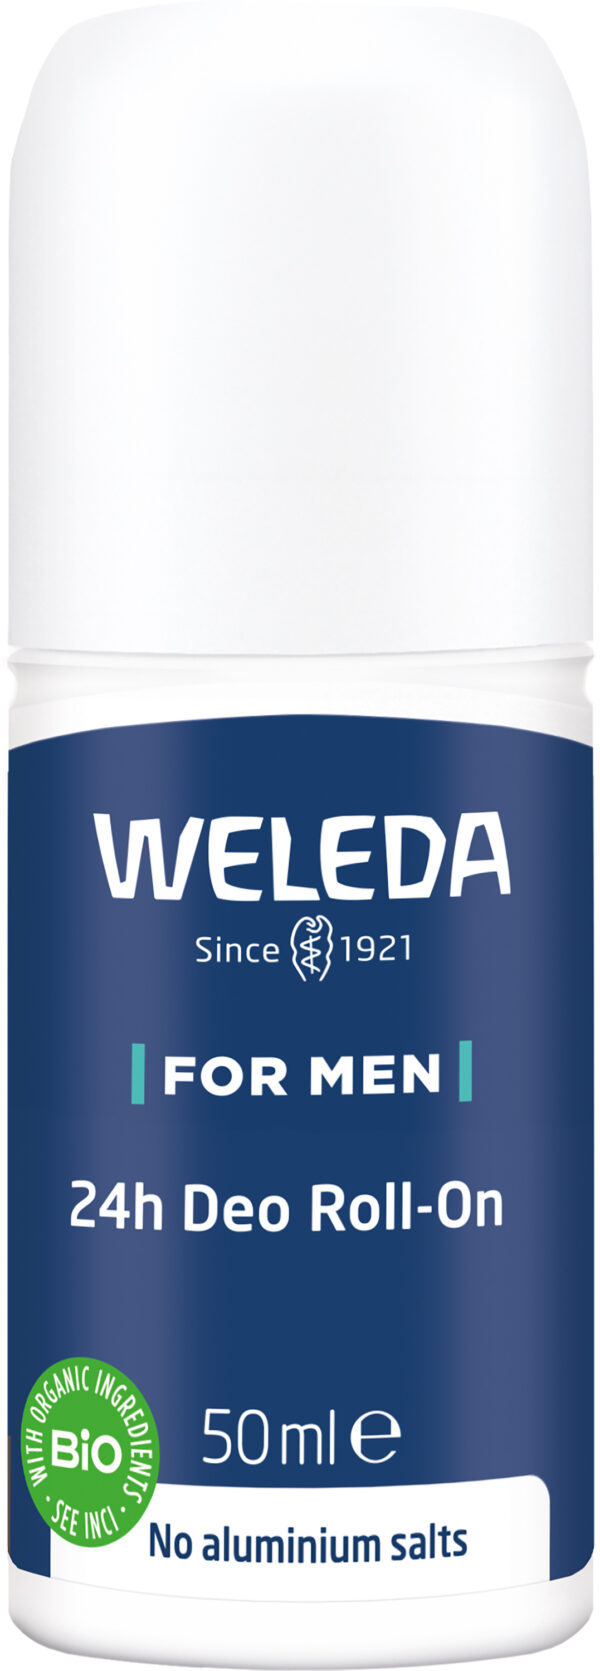 Weleda For Men 24h Deo Roll-On 50ml